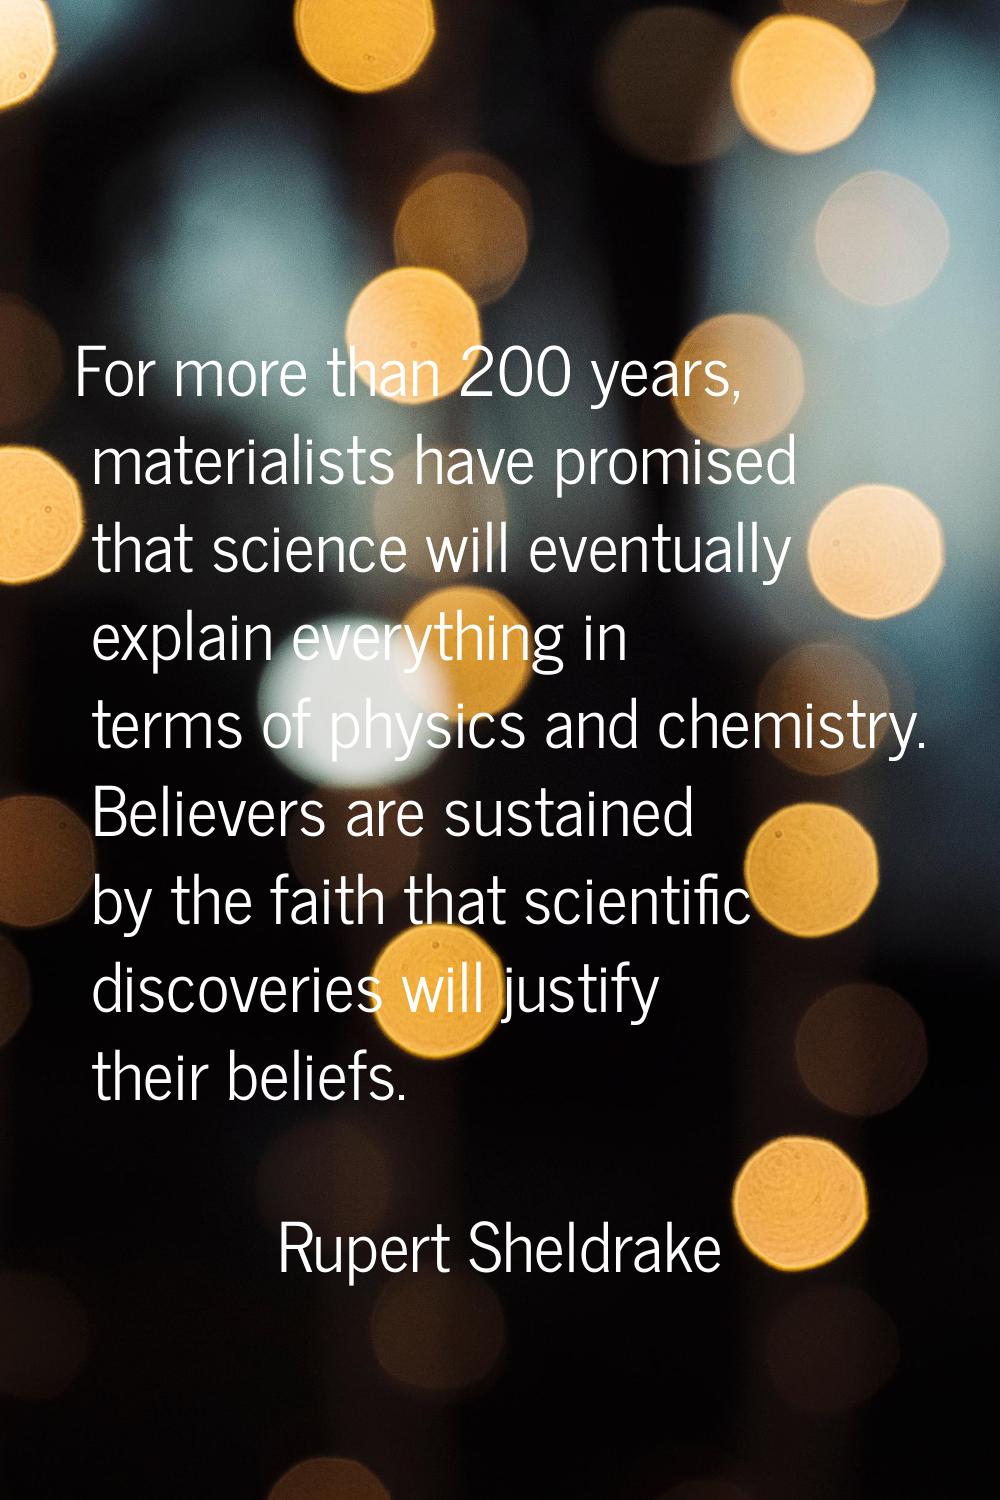 For more than 200 years, materialists have promised that science will eventually explain everything